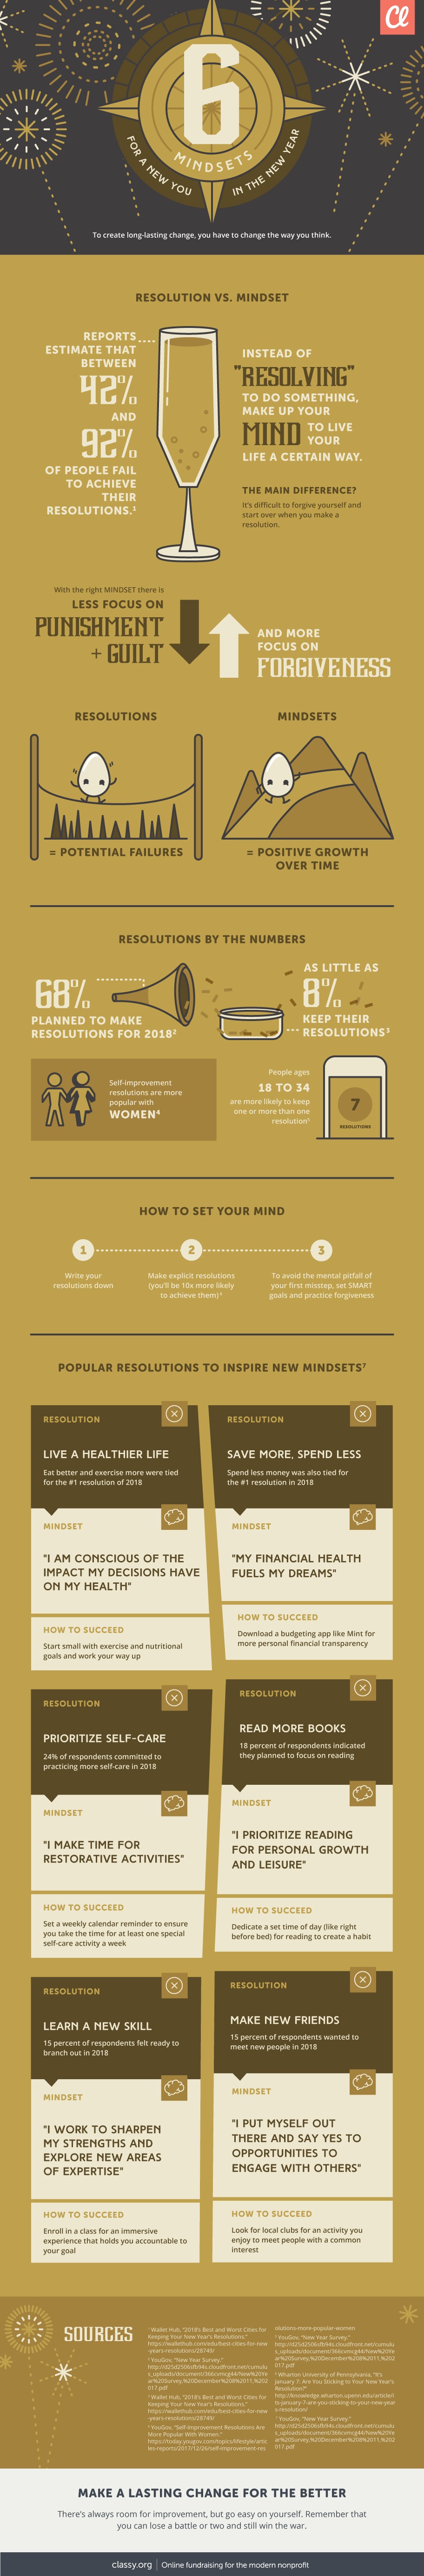 https://www.classy.org/blog/infographic-6-mindsets-new-year/